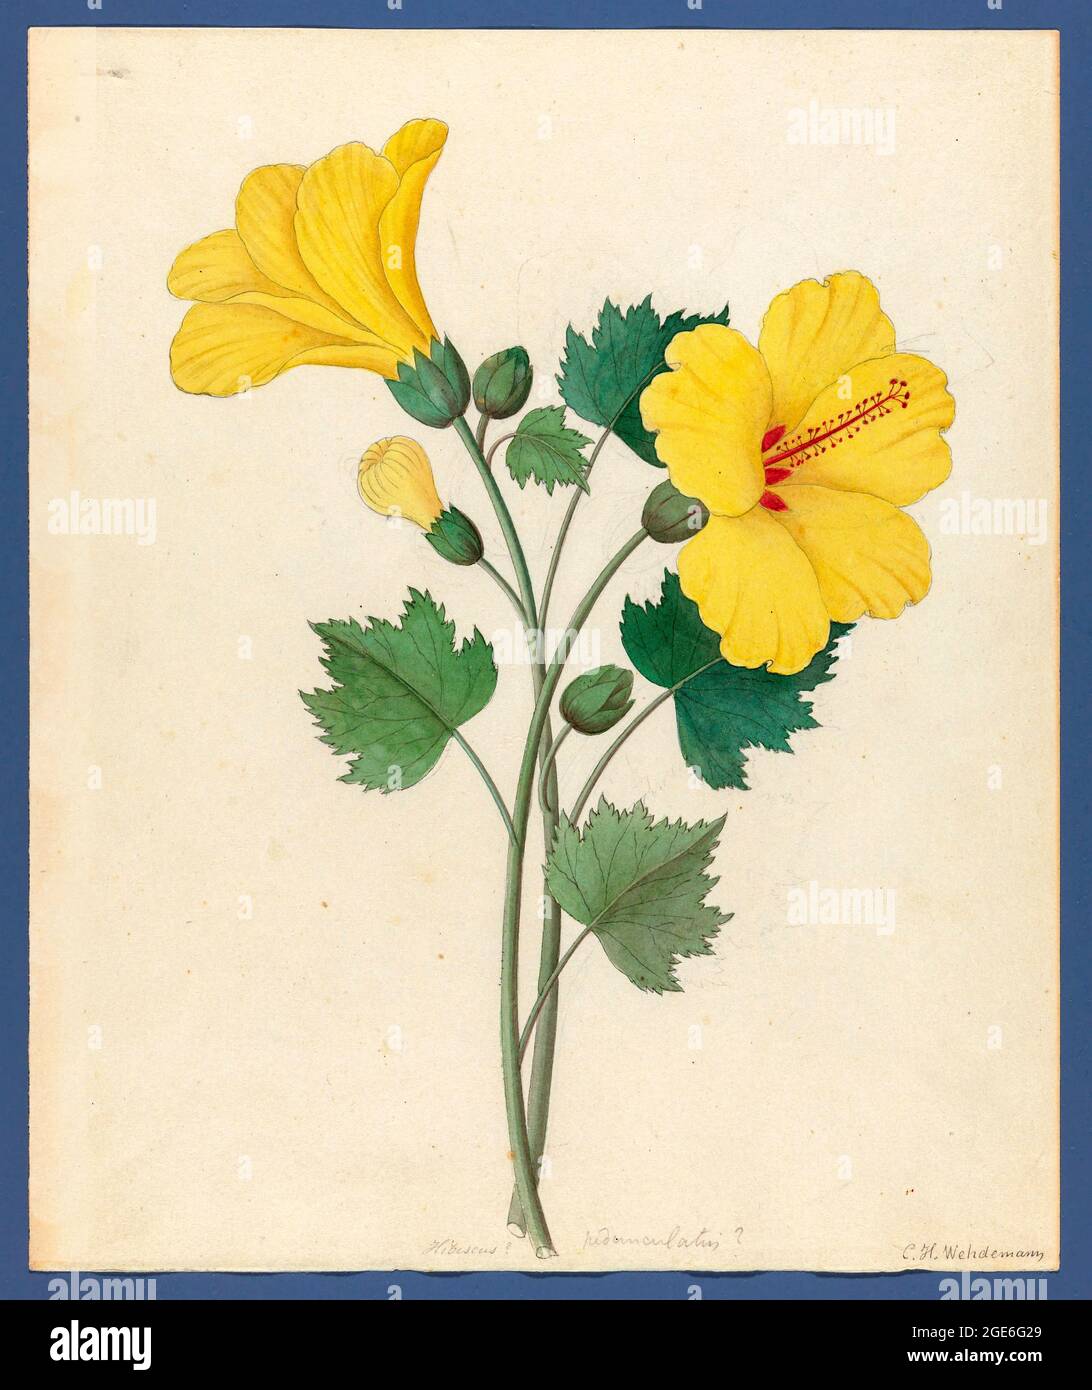 Hibiscus [Hibiscus calyphyllus] (1817) from a collection of ' Drawings of plants collected at Cape Town ' by Clemenz Heinrich, Wehdemann, 1762-1835 Collected and drawn in the Cape Colony, South Africa Stock Photo